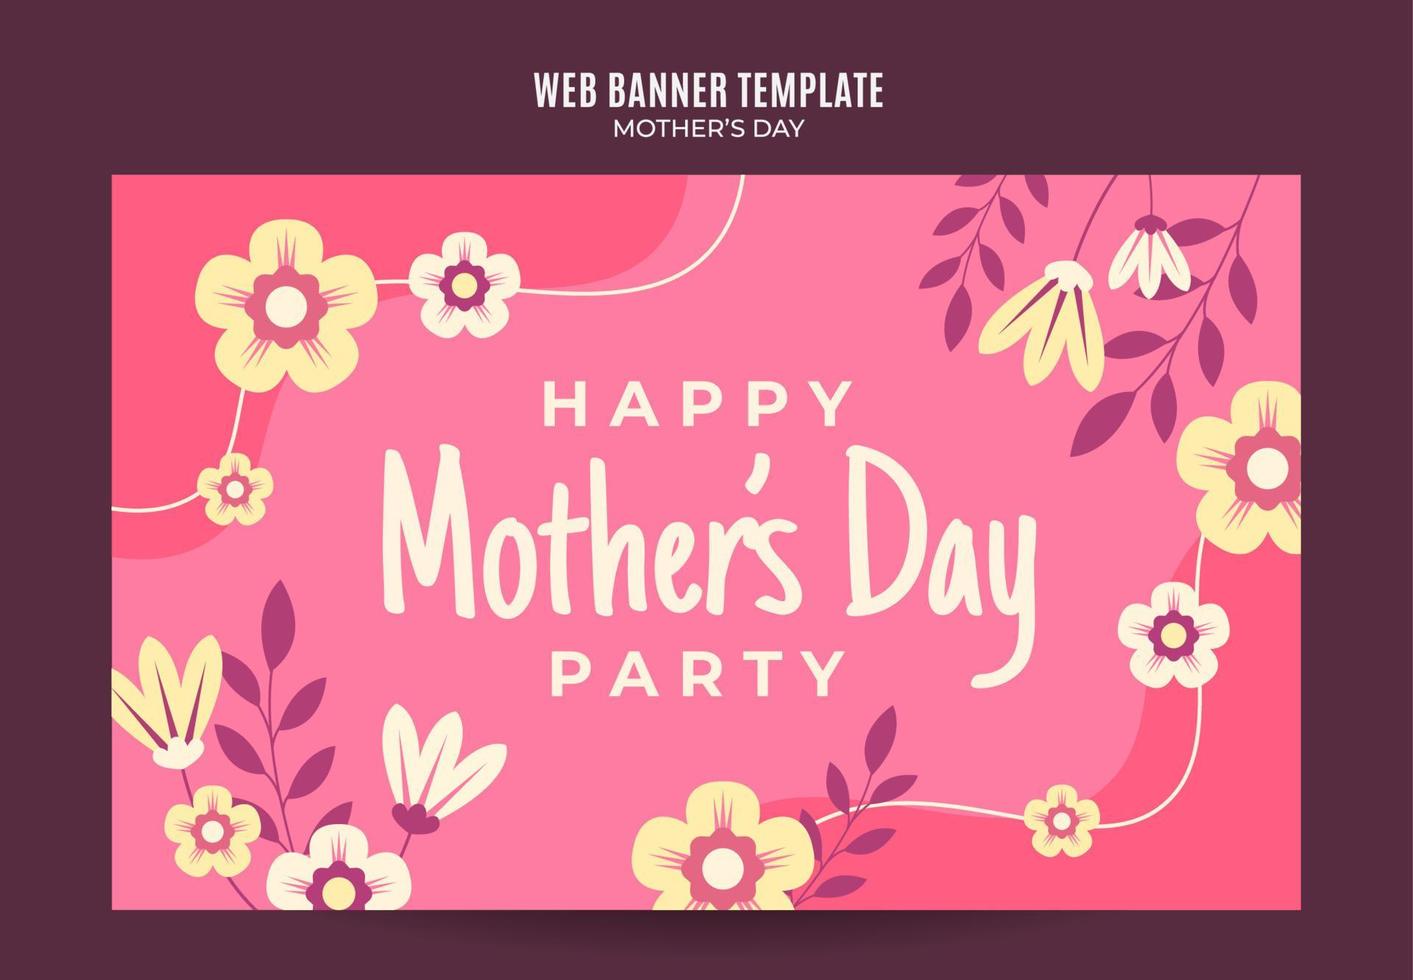 Happy Mother's Day Retro Web Banner for Social Media Poster, banner, space area and background vector